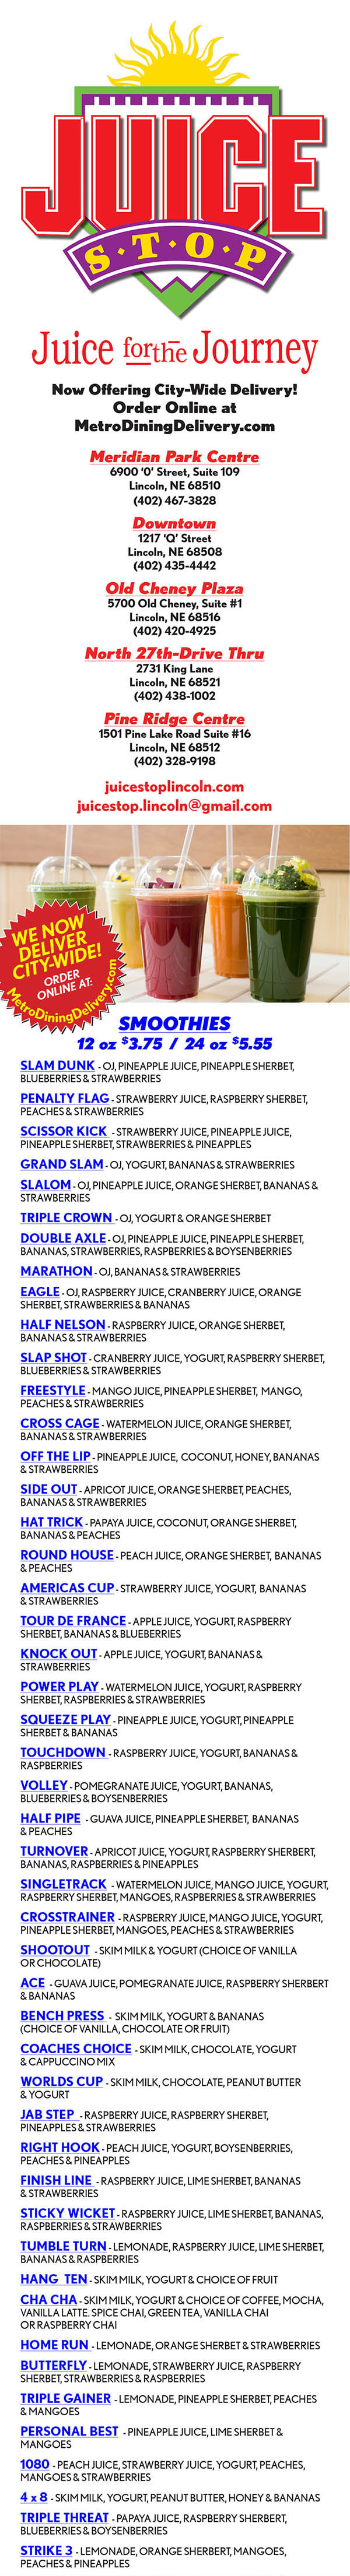 Juice Stop Real Fruit Smoothies Menu Lincoln Nebraska
Now Offering City-Wide Delivery!
Order Online at
MetroDiningDelivery.com
Meridian Park Centre
6900 ‘0’ Street, Suite 109
Lincoln, NE 68510
(402) 467-3828
Downtown
1217 ‘Q’ Street
Lincoln, NE 68508
(402) 435-4442
Old Cheney Plaza
5700 Old Cheney, Suite #1
Lincoln, NE 68516
(402) 420-4925
North 27th-Drive Thru
2731 King Lane
Lincoln, NE 68521
(402) 438-1002
Pine Ridge Centre
1501 Pine Lake Road Suite #16
Lincoln, NE 68512
(402) 328-9198
juicestoplincoln.com
juicestop.lincoln@gmail.com
SMOOTHIES
12 oz $3.75 / 24 oz $5.55
SLAM DUNK - OJ, PINEAPPLE JUICE, PINEAPPLE SHERBET,
BLUEBERRIES & STRAWBERRIES
PENALTY FLAG - STRAWBERRY JUICE, RASPBERRY SHERBET,
PEACHES & STRAWBERRIES
SCISSOR KICK - STRAWBERRY JUICE, PINEAPPLE JUICE,
PINEAPPLE SHERBET, STRAWBERRIES & PINEAPPLES
GRAND SLAM - OJ, YOGURT, BANANAS & STRAWBERRIES
SLALOM - OJ, PINEAPPLE JUICE, ORANGE SHERBET, BANANAS &
STRAWBERRIES
TRIPLE CROWN - OJ, YOGURT & ORANGE SHERBET
DOUBLE AXLE - OJ, PINEAPPLE JUICE, PINEAPPLE SHERBET,
BANANAS, STRAWBERRIES, RASPBERRIES & BOYSENBERRIES
MARATHON - OJ, BANANAS & STRAWBERRIES
EAGLE - OJ, RASPBERRY JUICE, CRANBERRY JUICE, ORANGE
SHERBET, STRAWBERRIES & BANANAS
HALF NELSON - RASPBERRY JUICE, ORANGE SHERBET,
BANANAS & STRAWBERRIES
SLAP SHOT - CRANBERRY JUICE, YOGURT, RASPBERRY SHERBET,
BLUEBERRIES & STRAWBERRIES
FREESTYLE - MANGO JUICE, PINEAPPLE SHERBET, MANGO,
PEACHES & STRAWBERRIES
CROSS CAGE - WATERMELON JUICE, ORANGE SHERBET,
BANANAS & STRAWBERRIES
OFF THE LIP - PINEAPPLE JUICE, COCONUT, HONEY, BANANAS
& STRAWBERRIES
SIDE OUT - APRICOT JUICE, ORANGE SHERBET, PEACHES,
BANANAS & STRAWBERRIES
HAT TRICK - PAPAYA JUICE, COCONUT, ORANGE SHERBET,
BANANAS & PEACHES
ROUND HOUSE - PEACH JUICE, ORANGE SHERBET, BANANAS
& PEACHES
AMERICAS CUP - STRAWBERRY JUICE, YOGURT, BANANAS
& STRAWBERRIES
TOUR DE FRANCE - APPLE JUICE, YOGURT, RASPBERRY
SHERBET, BANANAS & BLUEBERRIES
KNOCK OUT - APPLE JUICE, YOGURT, BANANAS &
STRAWBERRIES
POWER PLAY - WATERMELON JUICE, YOGURT, RASPBERRY
SHERBET, RASPBERRIES & STRAWBERRIES
SQUEEZE PLAY - PINEAPPLE JUICE, YOGURT, PINEAPPLE
SHERBET & BANANAS
TOUCHDOWN - RASPBERRY JUICE, YOGURT, BANANAS &
RASPBERRIES
VOLLEY - POMEGRANATE JUICE, YOGURT, BANANAS,
BLUEBERRIES & BOYSENBERRIES
HALF PIPE - GUAVA JUICE, PINEAPPLE SHERBET, BANANAS
& PEACHES
TURNOVER - APRICOT JUICE, YOGURT, RASPBERRY SHERBERT,
BANANAS, RASPBERRIES & PINEAPPLES
SINGLETRACK - WATERMELON JUICE, MANGO JUICE, YOGURT,
RASPBERRY SHERBET, MANGOES, RASPBERRIES & STRAWBERRIES
CROSSTRAINER - RASPBERRY JUICE, MANGO JUICE, YOGURT,
PINEAPPLE SHERBET, MANGOES, PEACHES & STRAWBERRIES
SHOOTOUT - SKIM MILK & YOGURT (CHOICE OF VANILLA
OR CHOCOLATE)
ACE - GUAVA JUICE, POMEGRANATE JUICE, RASPBERRY SHERBERT
& BANANAS
BENCH PRESS - SKIM MILK, YOGURT & BANANAS
(CHOICE OF VANILLA, CHOCOLATE OR FRUIT)
COACHES CHOICE - SKIM MILK, CHOCOLATE, YOGURT
& CAPPUCCINO MIX
WORLDS CUP - SKIM MILK, CHOCOLATE, PEANUT BUTTER
& YOGURT
JAB STEP - RASPBERRY JUICE, RASPBERRY SHERBET,
PINEAPPLES & STRAWBERRIES
RIGHT HOOK - PEACH JUICE, YOGURT, BOYSENBERRIES,
PEACHES & PINEAPPLES
FINISH LINE - RASPBERRY JUICE, LIME SHERBET, BANANAS
& STRAWBERRIES
STICKY WICKET - RASPBERRY JUICE, LIME SHERBET, BANANAS,
RASPBERRIES & STRAWBERRIES
TUMBLE TURN - LEMONADE, RASPBERRY JUICE, LIME SHERBET,
BANANAS & RASPBERRIES
HANG TEN - SKIM MILK, YOGURT & CHOICE OF FRUIT
CHA CHA - SKIM MILK, YOGURT & CHOICE OF COFFEE, MOCHA,
VANILLA LATTE. SPICE CHAI, GREEN TEA, VANILLA CHAI
OR RASPBERRY CHAI
HOME RUN - LEMONADE, ORANGE SHERBET & STRAWBERRIES
BUTTERFLY - LEMONADE, STRAWBERRY JUICE, RASPBERRY
SHERBET, STRAWBERRIES & RASPBERRIES
TRIPLE GAINER - LEMONADE, PINEAPPLE SHERBET, PEACHES
& MANGOES
PERSONAL BEST - PINEAPPLE JUICE, LIME SHERBET &
MANGOES
1080 - PEACH JUICE, STRAWBERRY JUICE, YOGURT, PEACHES,
MANGOES & STRAWBERRIES
4 x 8 - SKIM MILK, YOGURT, PEANUT BUTTER, HONEY & BANANAS
TRIPLE THREAT - PAPAYA JUICE, RASPBERRY SHERBERT,
BLUEBERRIES & BOYSENBERRIES
STRIKE 3 - LEMONADE, ORANGE SHERBERT, MANGOES,
PEACHES & PINEAPPLES
ACAI SMOOTHIES $7.10
ARONIA ISLAND - GUAVA JUICE, YOGURT, RASPBERRY,
SHERBERT, PINEAPPLES, BANANAS, ARONIA BERRIES & ACAI
PACKET
SURF’S UP - APPLE JUICE, ACAI PACKET, YOGURT, BANANAS,
BLUEBERRIES & STRAWBERRIES
RIP TIDE - CRANBERRY JUICE, ACAI PACKET, YOGURT ,
RASPBERRIES & MANGOES
THE GNARLY - POMEGRANATE JUICE, ACAI PACKET, YOGURT,
LIME SHERBERT, PINEAPPLES & PEACHES
SHRED SMOOTHIES $5.95
THE GOOD LIFE - LOW CARB JUICE, YOGURT, BANANAS,
STRAWBERRIES & STRAWBERRY WHEY PROTEIN
TROPICAL SHRED - LOW CARB JUICE, MANGOES, PINEAPPLES,
PEACHES & VANILLA WHEY PROTEIN
TIRE FLIP - LOW CARB LEMONADE, YOGURT, BLUEBERRIES,
STRAWBERRIES & ORANGE WHEY
GREEN SMOOTHIES
24 oz only $7.05
COCONUT PEACH - COCONUT MILK, PEACHES, PINEAPPLES,
ORANGES, SPINACH & GINGER
MANGO GINGER - APPLE JUICE, KALE, CUCUMBER,
MANGOES, GINGER & LIME
BERRIE’S & GREENS - POMEGRANATE JUICE, BLUEBERRIES,
BOYSENBERRIES, YOGURT, KALE & SPINACH
PB & GREENS - ALMOND MILK, PEANUT BUTTER, YOGURT,
SPINACH & BANANAS
CUCUMBER LIME COOL DOWN - LEMONADE,
CUCUMBER, LIME, SPINACH, PEACHES, PINEAPPLES & MANGOES
SEE STORE OR FACEBOOK PAGE BELOW
FOR SEASONAL AND MONTHLY SPECIALS.
NUTRIENTS
EVERY SMOOTHIE RECEIVES ONE FREE NUTRIENT
ADDITIONAL NUTRIENT .50¢ EACH
DAILY BLEND - DAILY DOSE OF VITAMINS & MINERALS
SMART BLEND - INCREASE AWARENESS
ENERGY BLEND - NATURAL ENERGIZER
VITALITY BLEND - ANTIOXIDANT TO PURIFY THE BODY
WELLNESS BLEND - BOOST THE IMMUNE SYSTEM
METABOLIC BLEND - SPEEDS METABOLISM
BRAN BLEND - WATER SOLUBLE FIBER
POWER BLEND - MUSCLE GROWTH
GREEN BLEND - SUPER FOODS
INTENSITY BLEND - PRE & POST WORKOUT
JOINT VENTURE BLEND - HELPS SOOTH YOUR JOINTS
BLISS BLEND - A BLEND OF CALMING HERBS
CALCIUM BLEND - ESSENTIAL FOR HEALTHY BLOOD
UP YOUR GAME!
AVAILABLE UPON REQUEST:
WHEATGRASS - $2.50 per oz. (2oz $4.50) - “Live food for live
cells.” This describes the miracle food wheatgrass - the health builder, cleanser
and natural healer. Wheatgrass is one of nature’s rich sources of vitamins A, B,
C, E and all of the known mineral elements. It purifies and detoxifies the body
and aids in metabolizing nutrients. Wheatgrass contains about 70% chlorophyll
which is considered “the life giving source” of plants. One ounce of wheatgrass
is comparable in nutrients to over two pounds of vegetables
COLLOIDAL MINERALS - 95¢ per oz. - A source of 74 essential
minerals extracted from prehistoric humic shale, supplementing the eight
minerals typically found in foods produced from today’s depleted soils
ORGANIC ARONIA BERRIES - $1.00 - Locally grown super
fruit that are high in anti-virals & antioxidants which boost the immune system &
are also rich in fiber.
TUMERIC, LEMON, GINGER, CAYENNE SHOTS-$2.05
Cleanse, detoxify, and boost metabolism while balancing PH levels.
Powerful anti-inflamitory properties & helps manage healthy immune system
ACAI PACKETS - $2.00 per packet (3.4 OZ.) Acaí: (ah-sigh-ee)
Natures energy fruit. Acaí is one of the healthiest fruits in the world because of
its high levels of antioxidants essential omegas and fiber.
KALE - $1.00 - great anti-inflammatory food. High in antiocidants & holds
more lutein than any other vegetable. Contains 45% protein & is known for
being a detoxifier
SPINACH - $1.00 - Contains flavonoids - a phytonutrient with anti-cancer
properties. Contains high levels of iron, vitamin k, vitamin a & manganese.
Fantastic for digestion
CUCUMBER - $1.00 - Encourages healthy skin, hair & nails. Know
to treat rhumatic conditions & it’s diuretic properties are beyond compare.
Regulates blood pressure.
MATCHA GREEN TEA - $1.00 - Green tea energy source will
boost your metabolism & burn calories. Packed with antioxidants, vitamins,
chlorophyll, & rich in fiber. Can aid in lowering cholesterol.
SOY PROTEIN - $1.00 (approx 20 grams) - Non dairy protien, which is
great for weight loss, and reduces cholesterol and the risk for heart disease
WHEY PROTEIN - $1.00 (approx 20 grams) - Perfect for strength and
endurance athletes as well as health consious individuals.
Flavors - vanilla, strawberry, chocolate, orange
FLAX SEED - $1.00 (approx 5 grams) - Fights cholesterol, diabetes,
cancer, heart disease, and provides a good source of fiber and Omega 3’s
CHIA SEEDS - $1.00 - A super food which is high in Omega 3’s
GRANOLA - 50¢ per scoop - Add these whole nuts and oats to any
smoothie to get an extra intake of fiber for the day.
LOW CARB JUICE - 50¢ - Lower your calories & sugars by adding
low carb juice to any smoothie. Our strawberry, kiwi flavored low carb juice has
30 calories & 7 carbs.
COCONUT MILK - 50¢ - Dairy free, gluten free, & soy free.
Lower calories, lower cholesterol, relieves arthritis, calms nerve cells &
strengthens bones.
ALMOND MILK - 50¢ - 50% more calcium, O Saturated Fat or
Cholesterol, Dairy free, Gluten free, Nut based milk substitute.
CREATINE - 50¢ - Proven to increase energy, enhances muscle size
and strength, increases power output
HANGOVER BLEND - 50¢ - Helps to restore focus with gingko
biloba & Taurine. Ease the stomach with Ginger Root & Peppermint.
PROBIOTICS - 50¢ - Supports digestive health by introducing good
bacteria into the digestive tract.
PEANUT BUTTER - 50¢ - Has vitamin E, B6, Magnesium, Potassium
& a great source of protein
COCONUT - 50¢ - Add a little flavor & enjoy the added benefits of Iron
& Zinc. Coconut is also a good source of protein & fiber.
BUZZER BEATER -$2.50 - A can of Red Bull is added to any smoothie
Mugs - Snacks - And More!
Rechargeable Gift Cards Available!
Juice Stop Does It Different
No sugary purees, No sweetened fruits,
No smoothie mixes! Juice Stop specializes in
custom-made frozen smoothies, fresh juices and
healthy snacks. We blend exactly what you ask for
at a competitive price.
The high quality of our products is what makes your
Juice Stop experience memorable. We go to great
lengths to satisfy you, our valued customer, in ways
that cannot be matched by other juice establishments.
At Juice Stop all of our non-fat yogurts
and delicious sherbets are made especially for
us from the brand leader in the frozen dessert
industry. They are made from carefully selected,
premium ingredients for great tasting flavors and
a creamy texture. We have also refined our juice
formulations. We continually meet with our growers
to ensure only the most succulent fruits are
picked so you will continue to enjoy nothing but the
high-quality, natural products you have come to
expect from Juice Stop
Juice Stop looks forward to helping you reach your
goals of becoming a healthier, happier you! All
smoothies made non-dairy on request. All yogurt is
non-fat.
Cold pressing is a juicing method in which fruit and
vegetables are slowly squeezed at incredibly high
pressures to yield the most nutritious, best tasting juice
possible. This ensures that all the produce’s fiber is
utilized and that nothing is wasted or burned off in the
process. All natural, NOTHING added.
BENIFITS OF REVIVE COLD-PRESSED JUICE
• Natural slim down approach
to healthier lifestyle • Balance PH levels
• Improves digestion • Lower blood pressure
• Increase energy levels • Cleanse the colon
• Strengthen immune system
